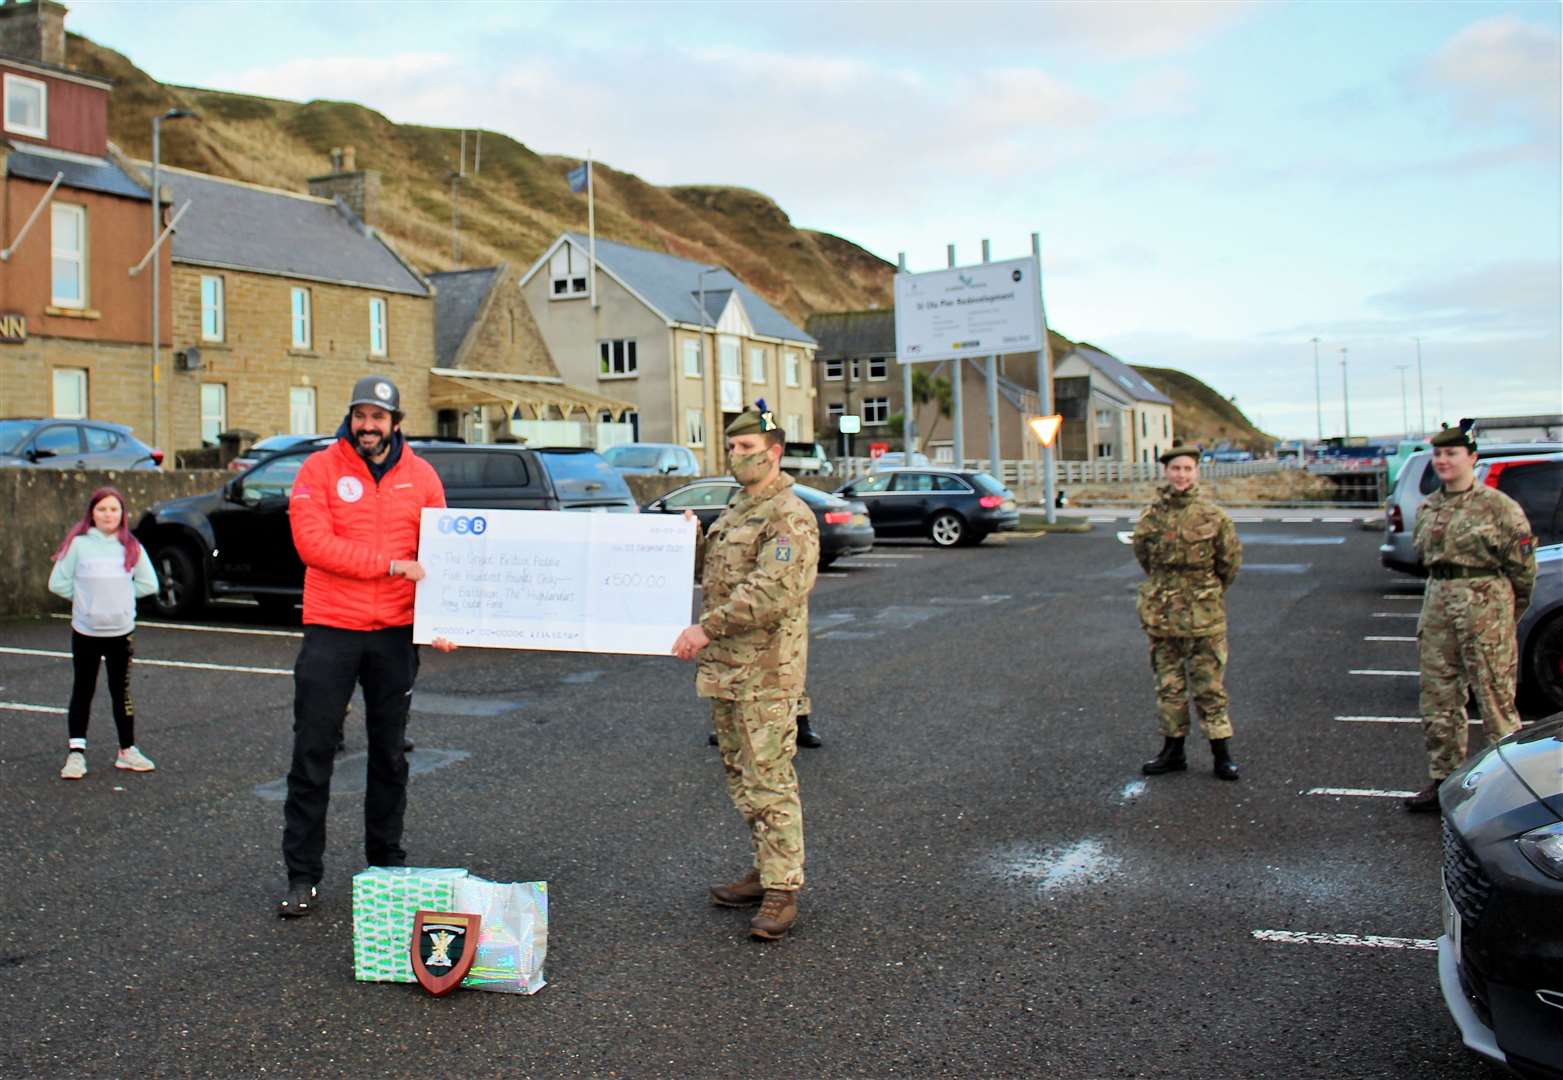 Sergeant Major Instructor Stuart Taggart (right) presenting Jordan with a £500 donation and a Caithness care package, alongside cadets who attended to lend support.